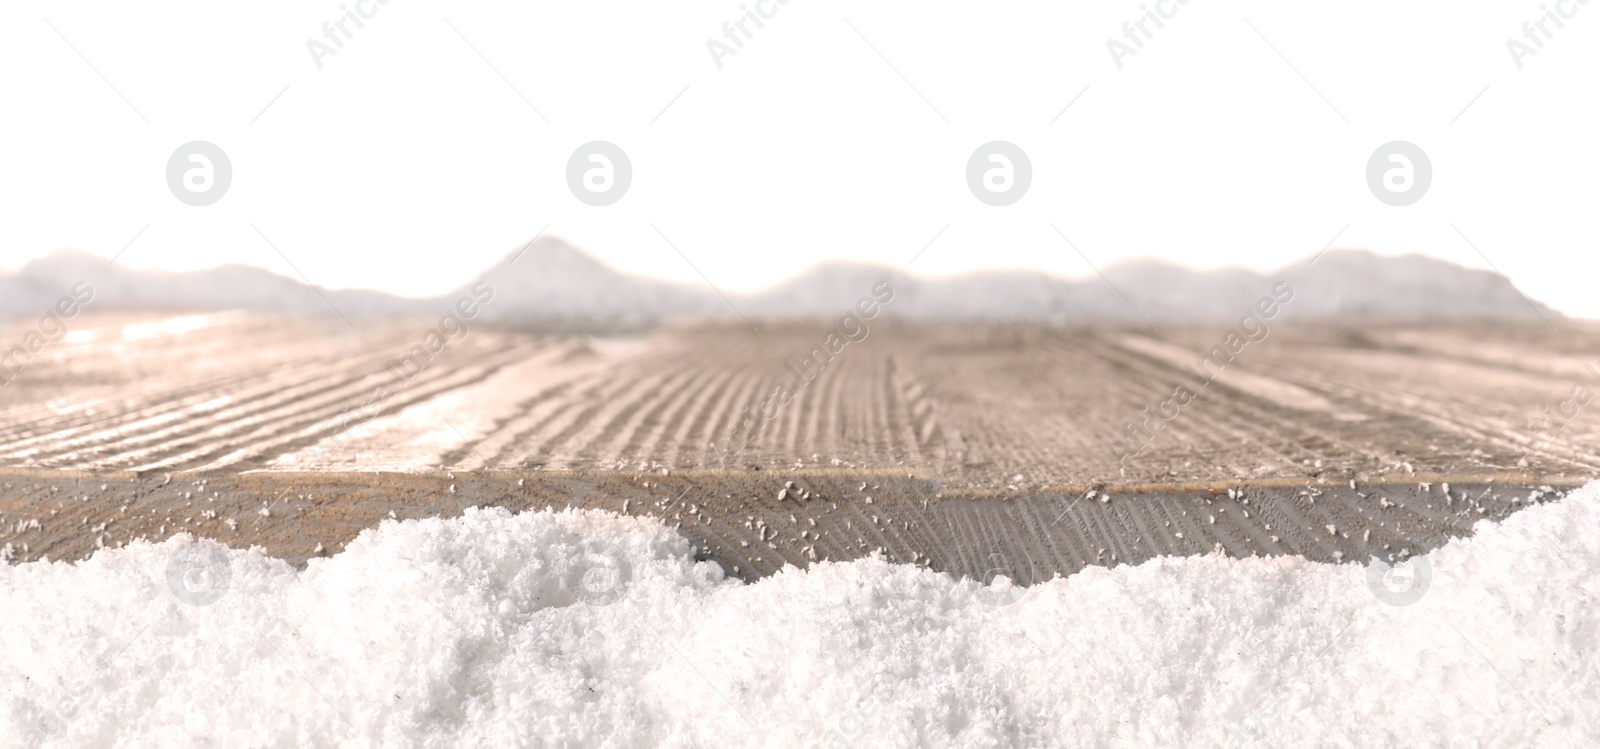 Photo of Heap of snow near wooden surface isolated on white